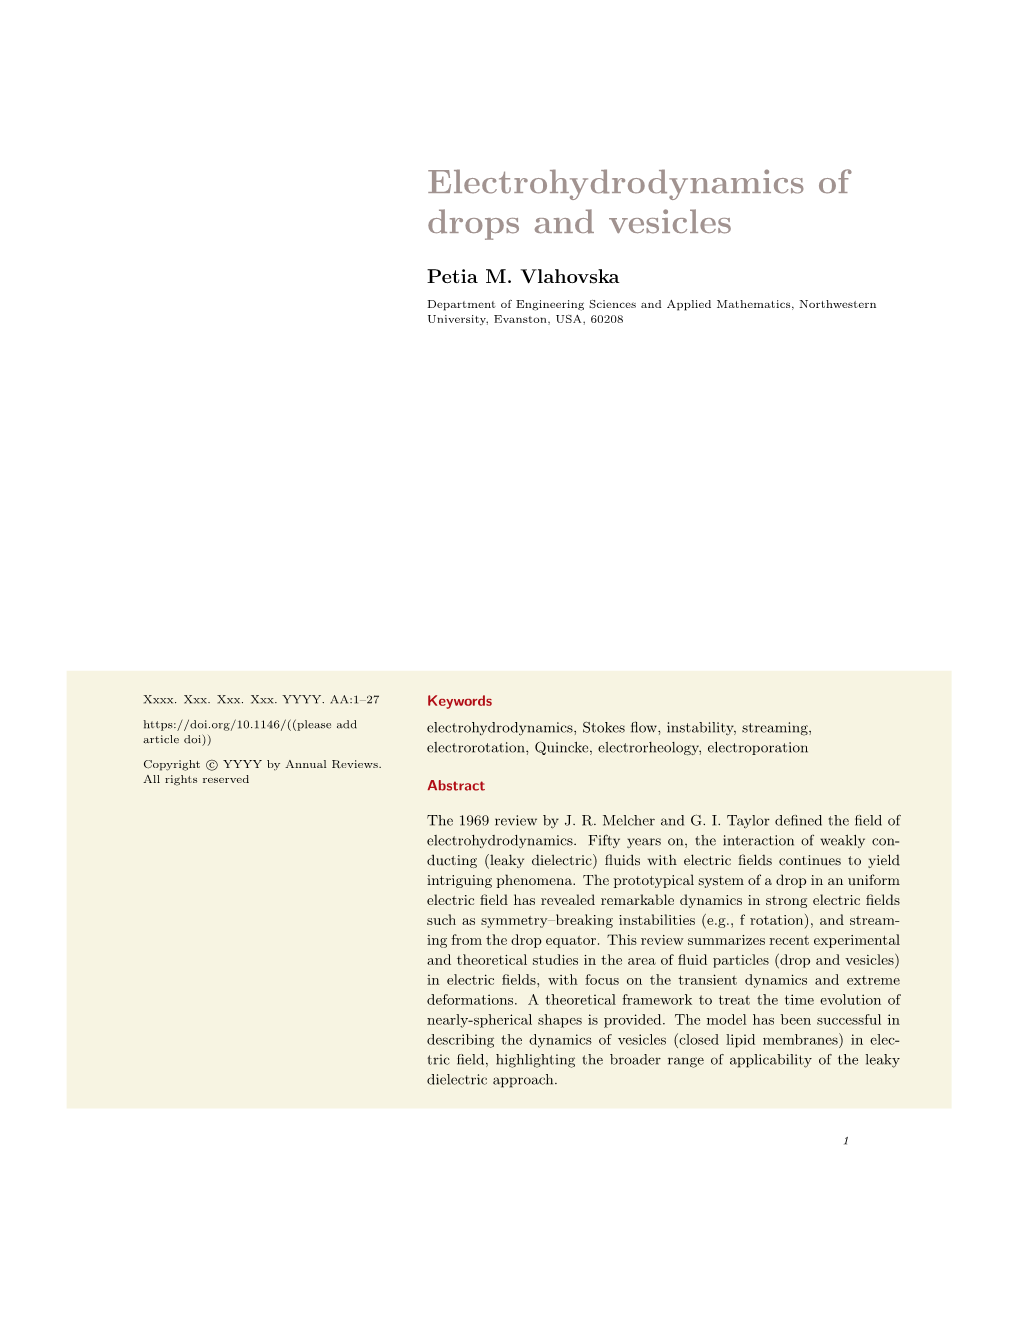 Electrohydrodynamics of Drops and Vesicles